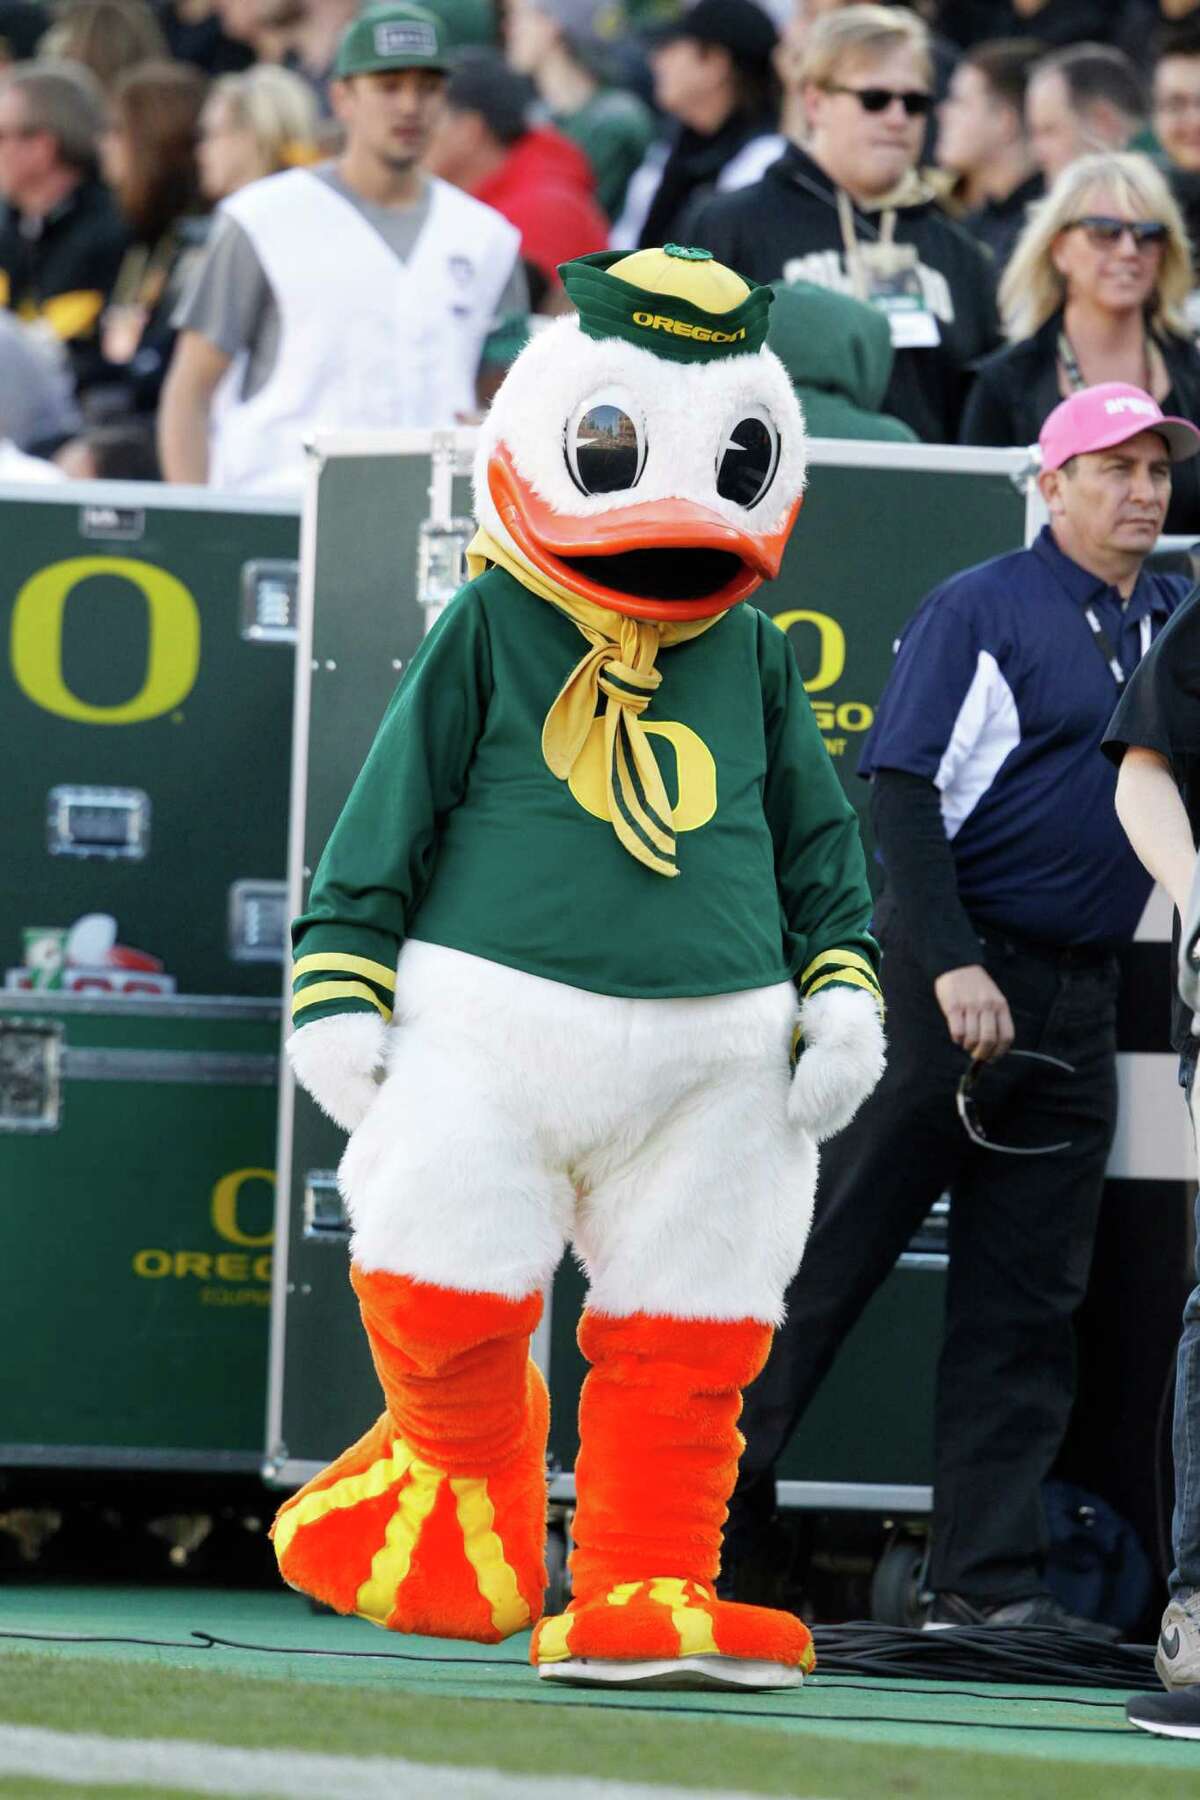 The Oregon Duck replaced the Webfoots as the official mascot.